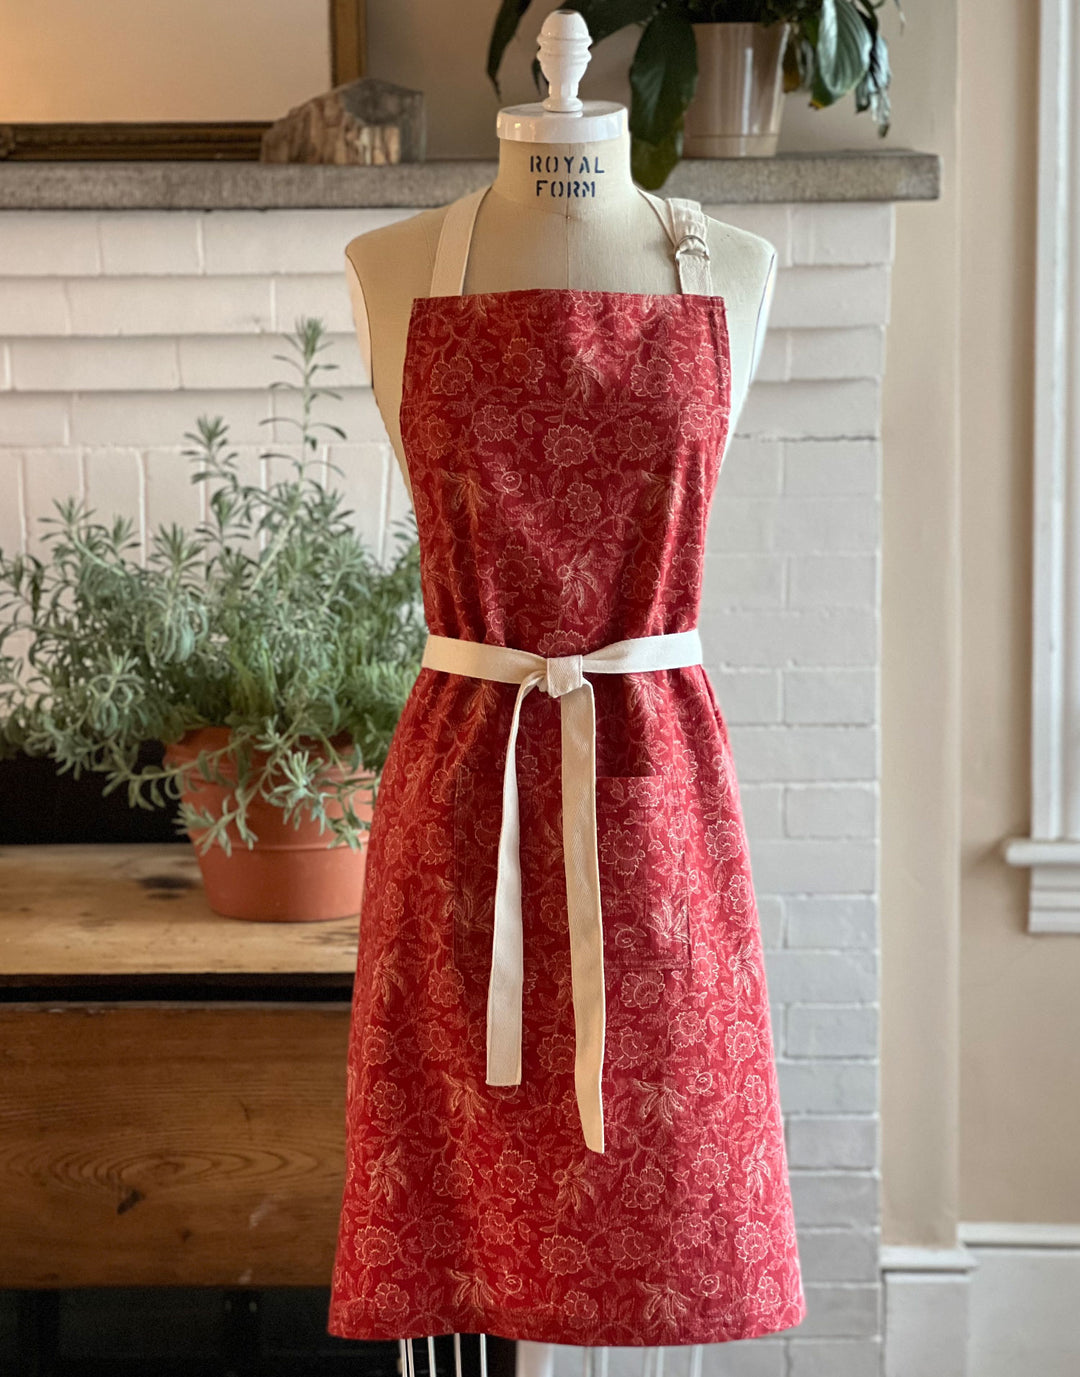 Classic Red Apron